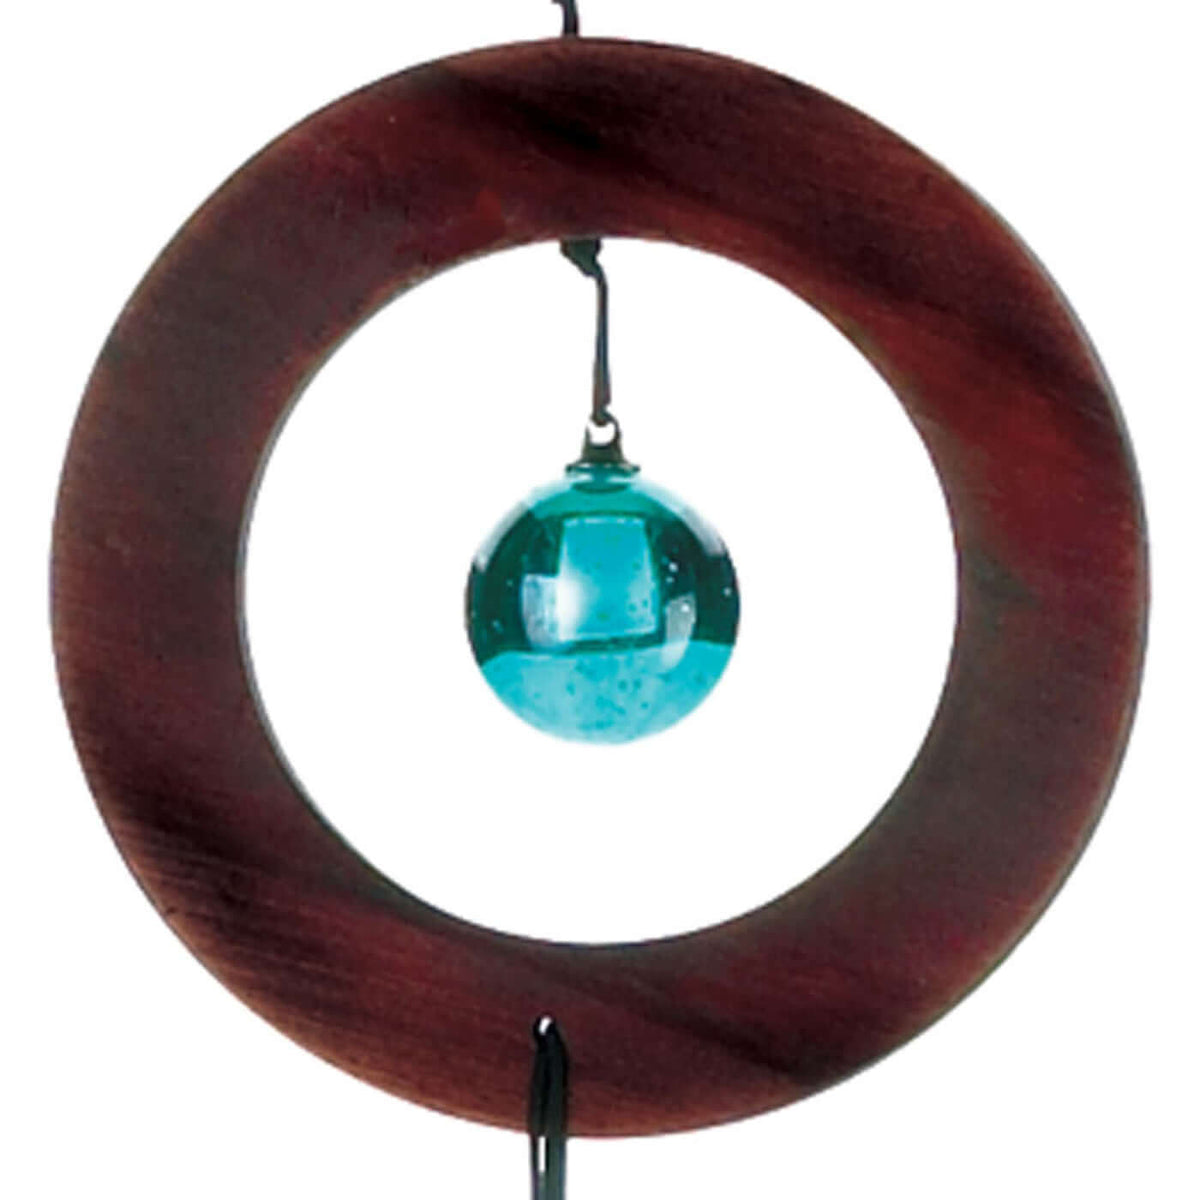 35 Inch Circle Wind Chime- The House of Awareness